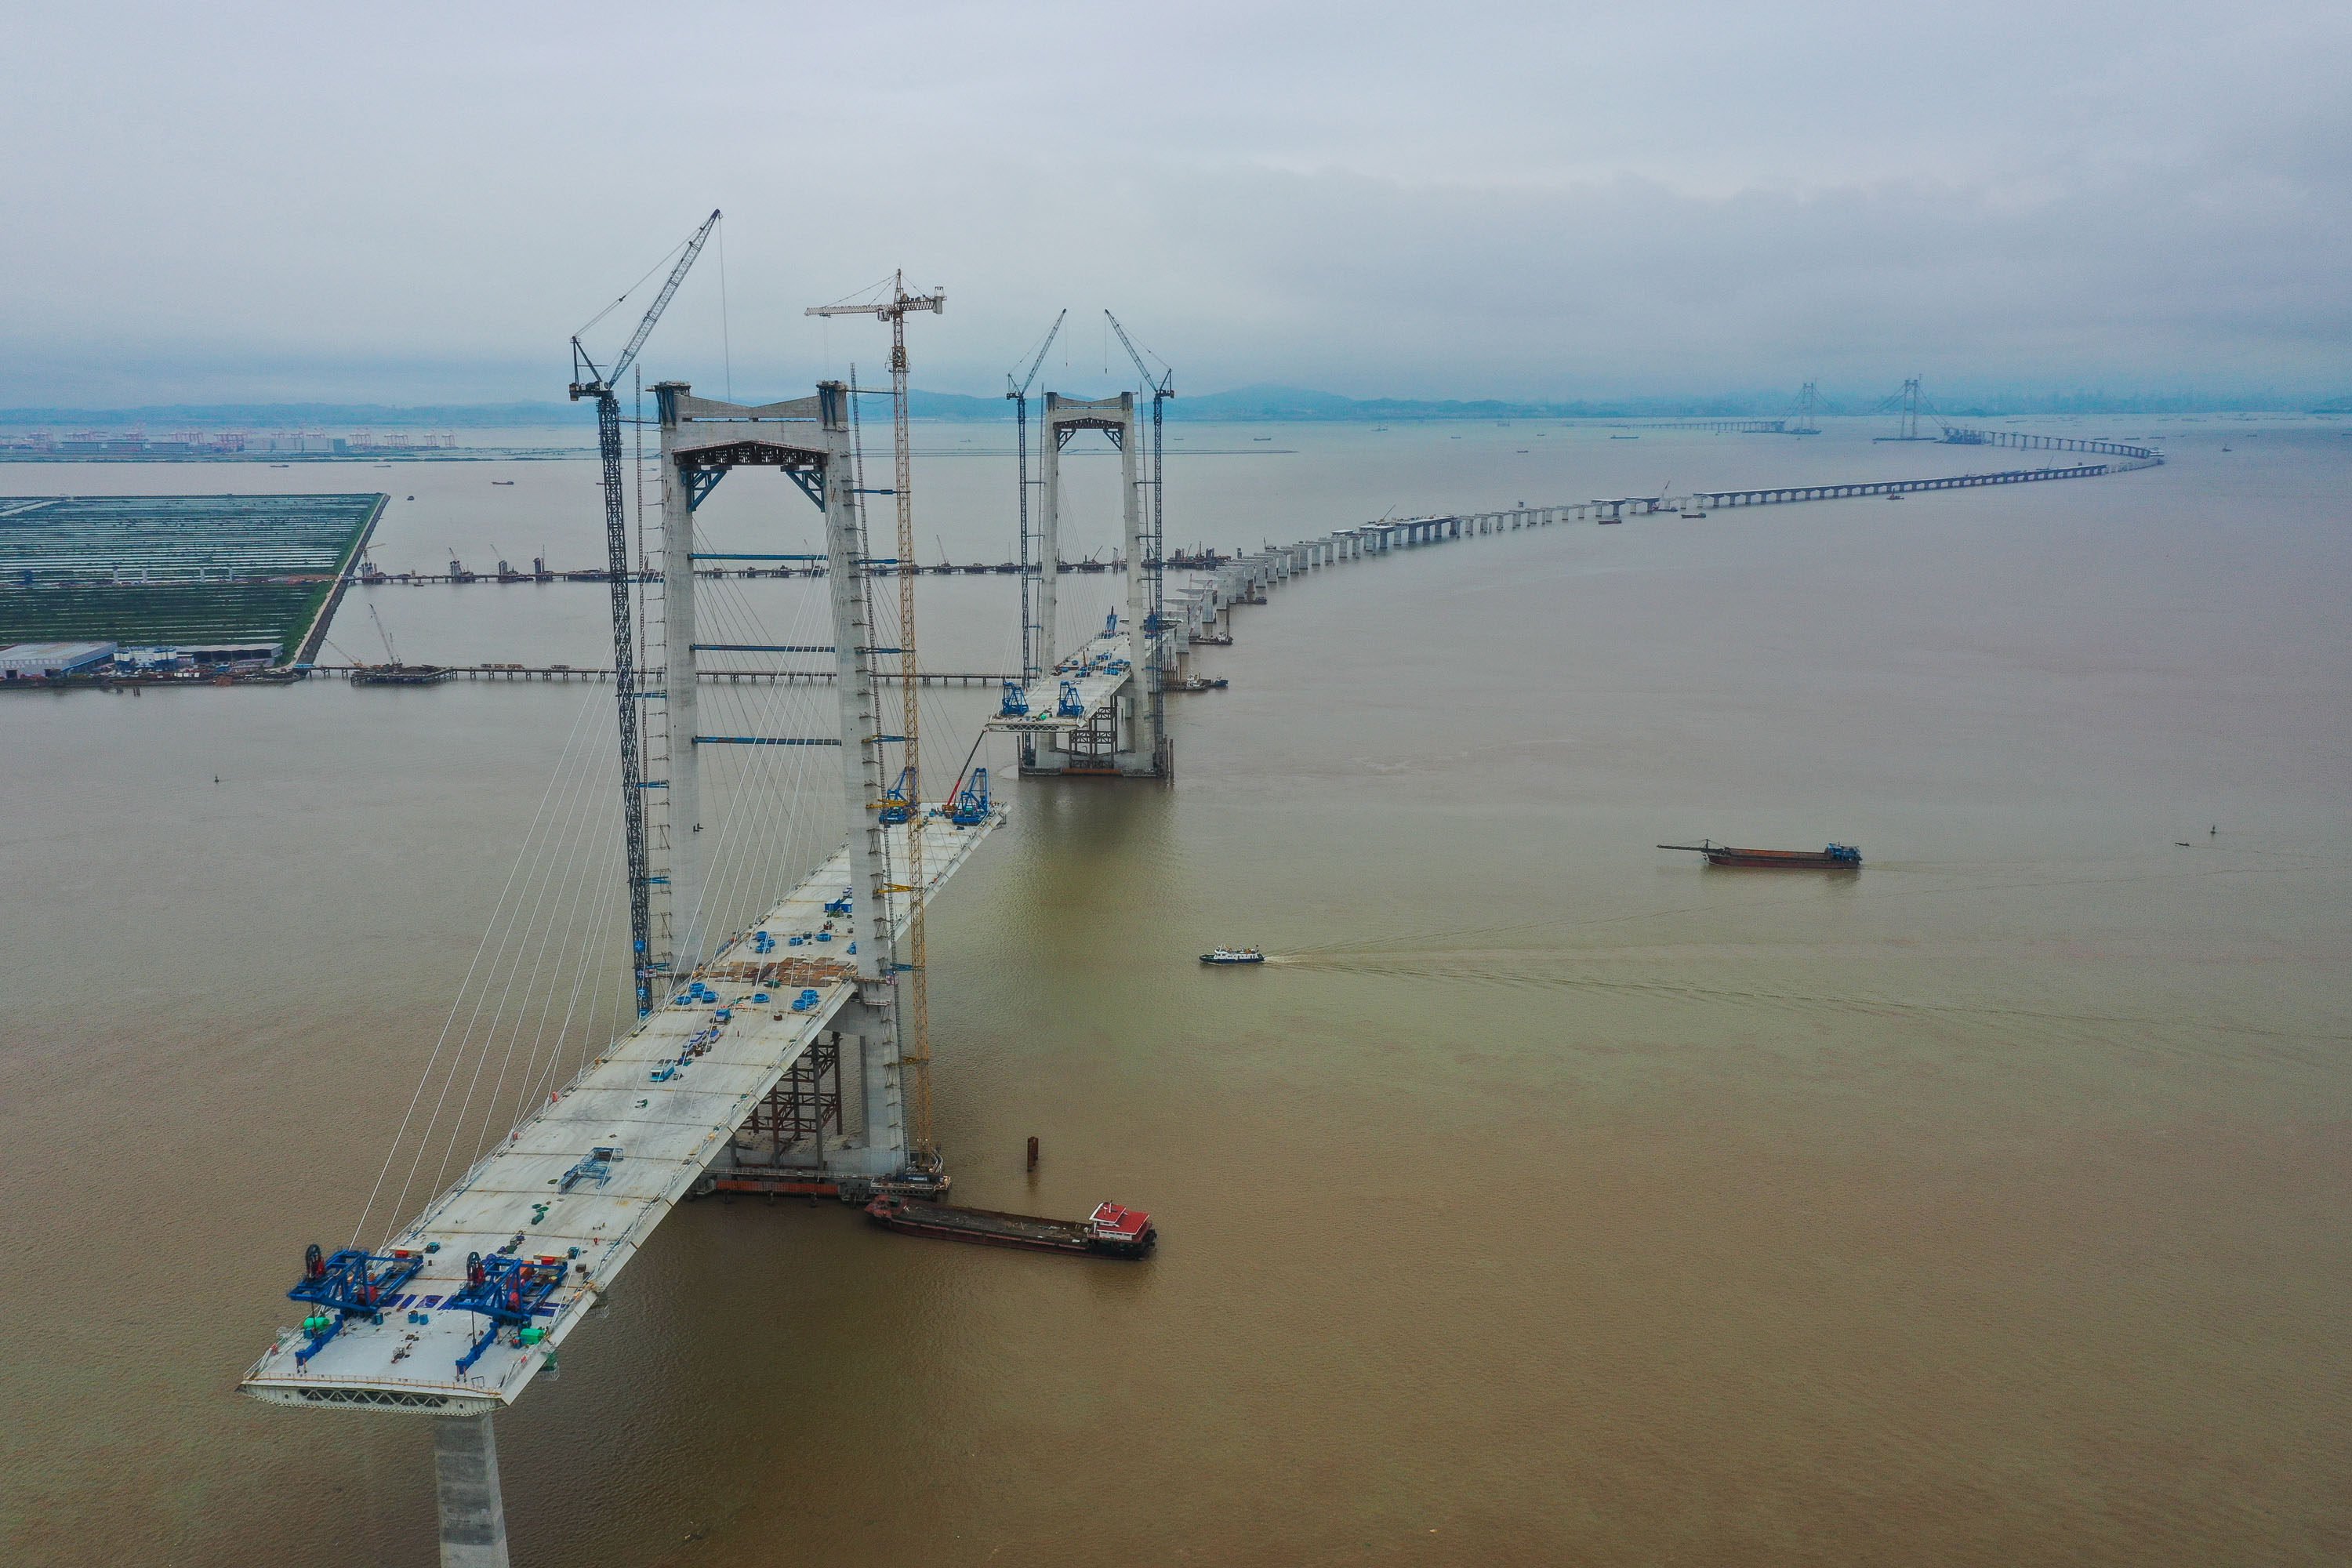 Construction continues on the Shenzhen-Zhongshan highway link in Guangdong province on May 15. The central government has introduced a series of measures, including infrastructure projects, intended to provide stimulus as the economy recovers from the Covid-19 pandemic. Photo: Xinhua